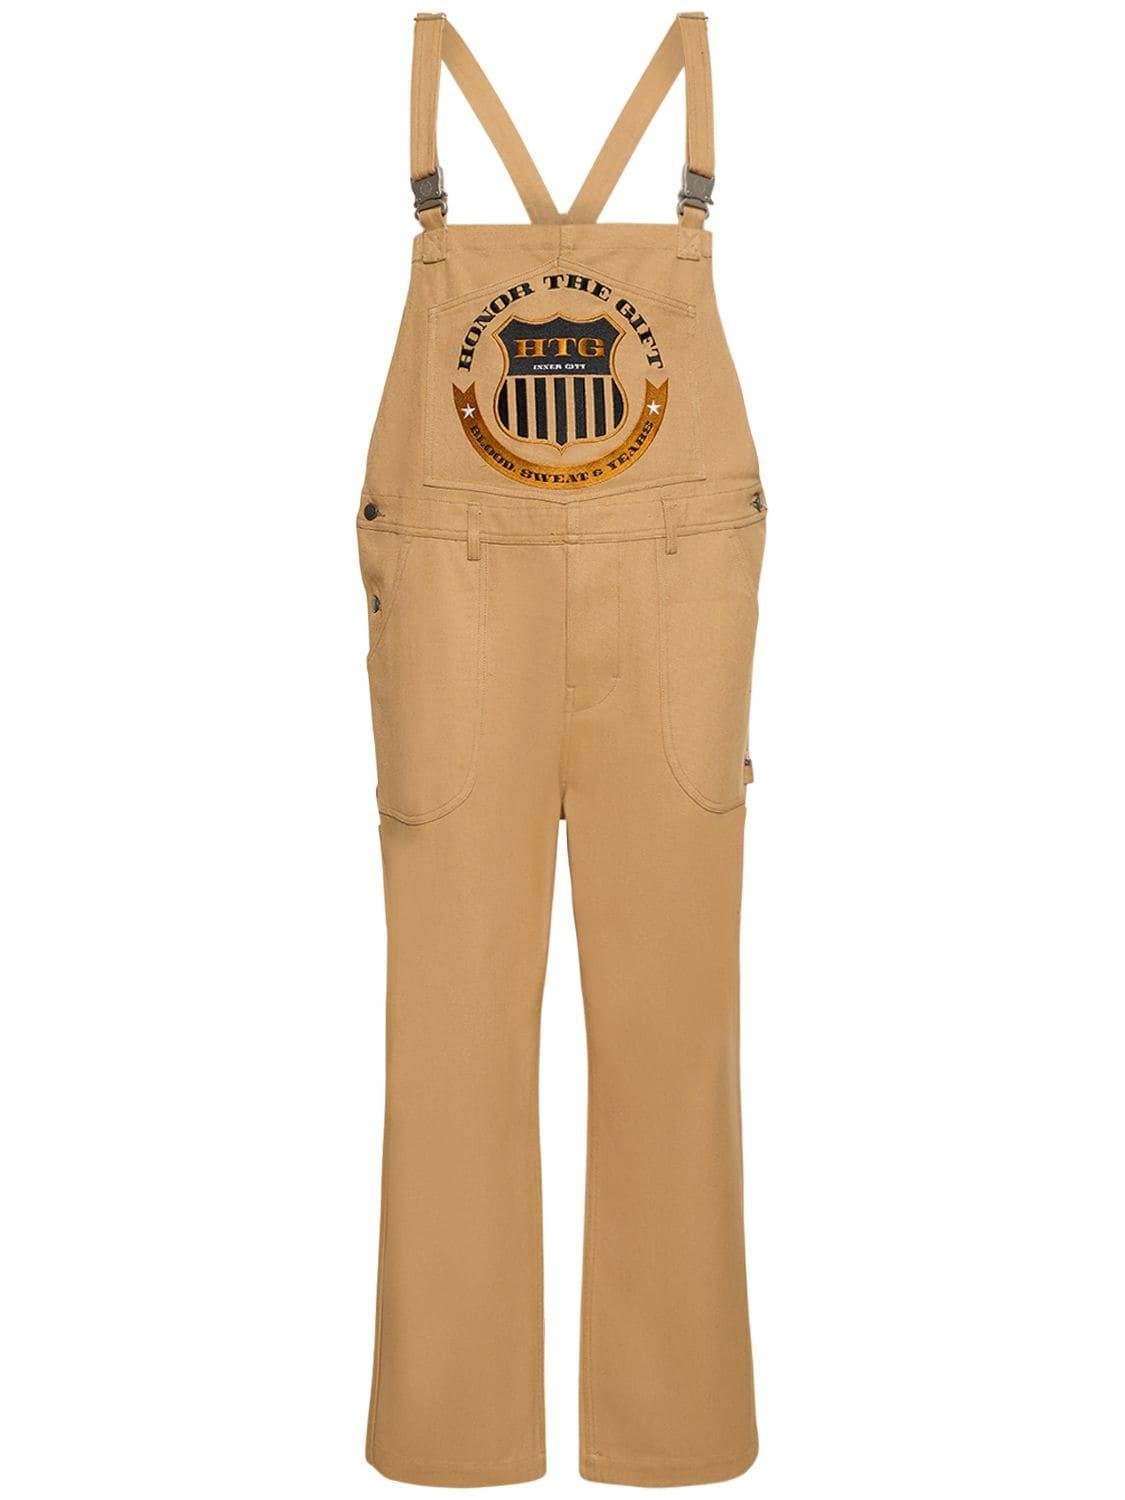 Workwear Cotton Blend Overalls W/logo by HONOR THE GIFT